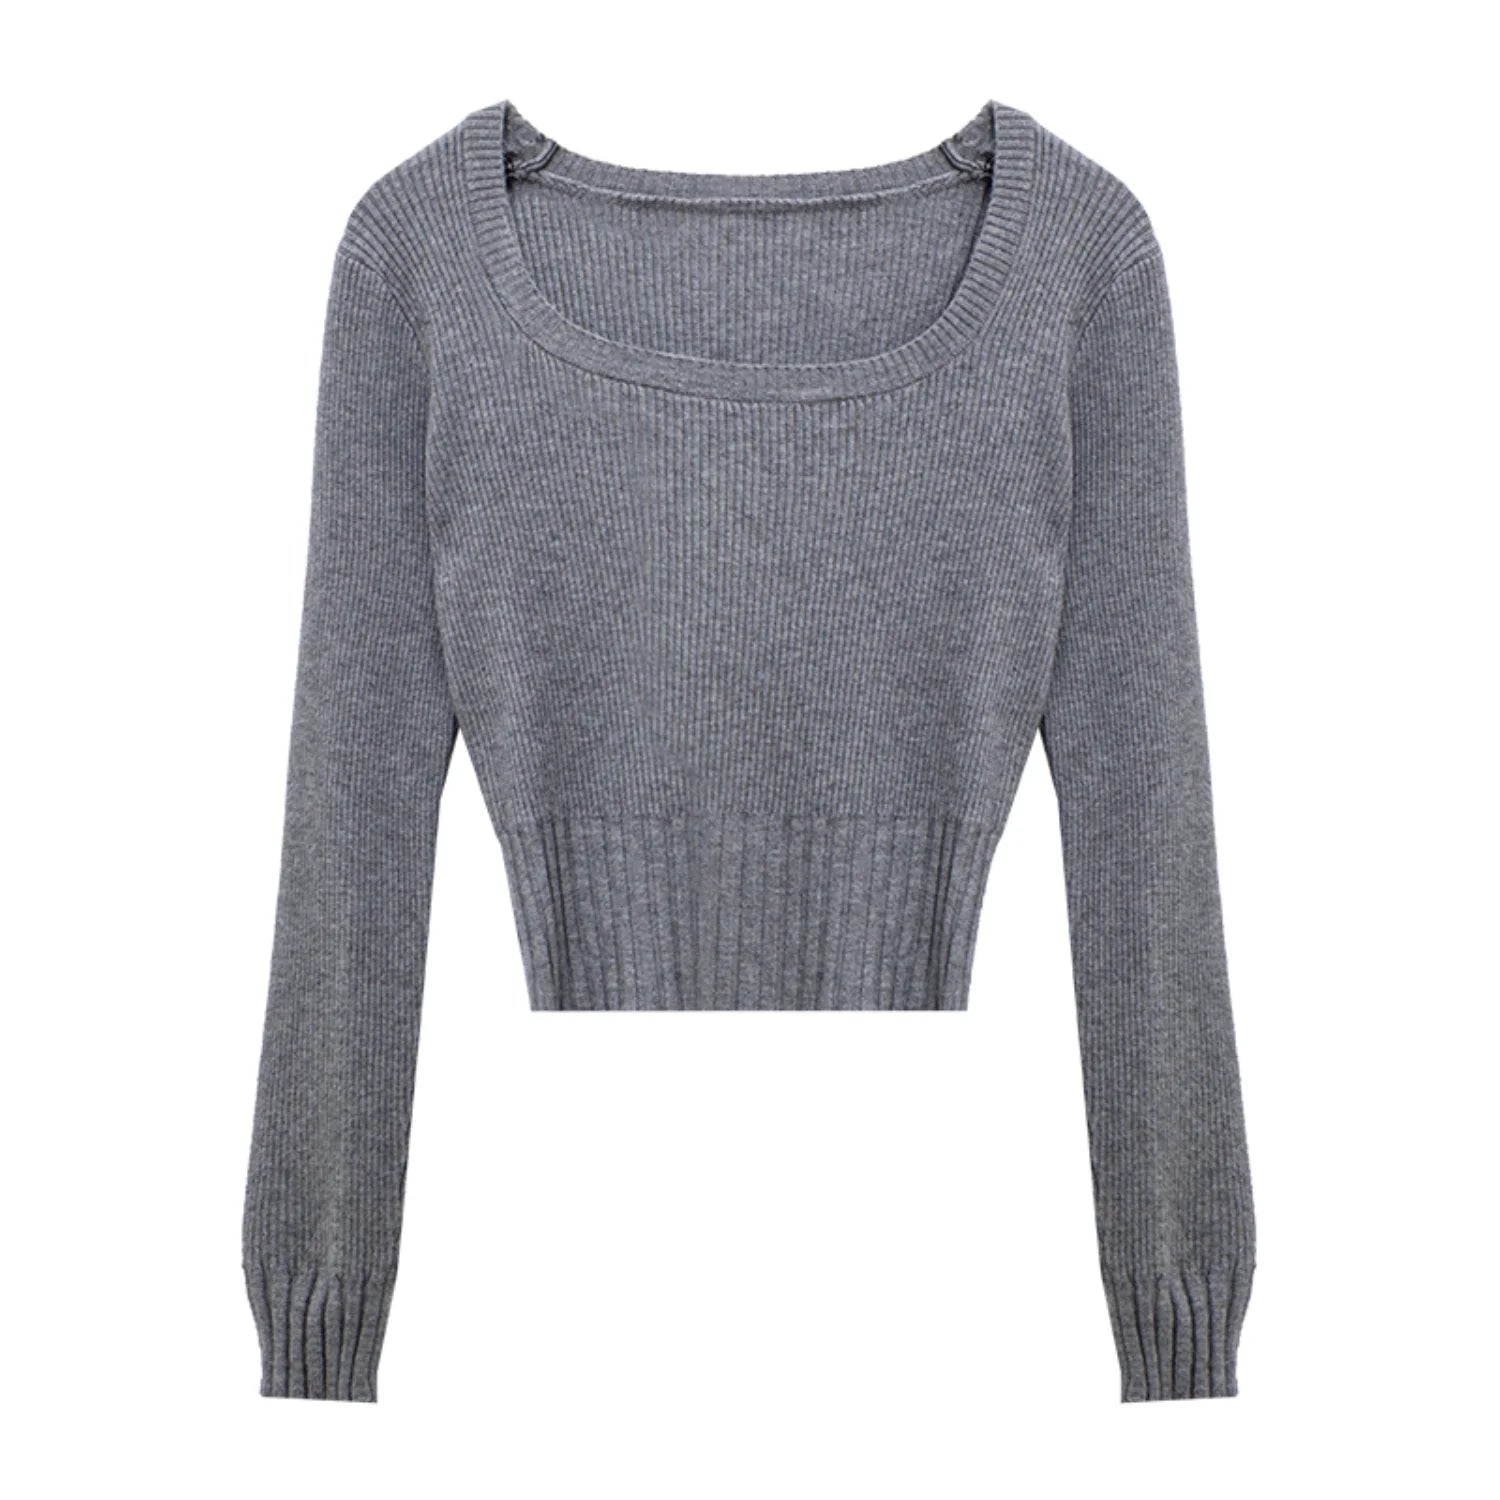 Fitted Round Neck Long Sleeve Knit Top